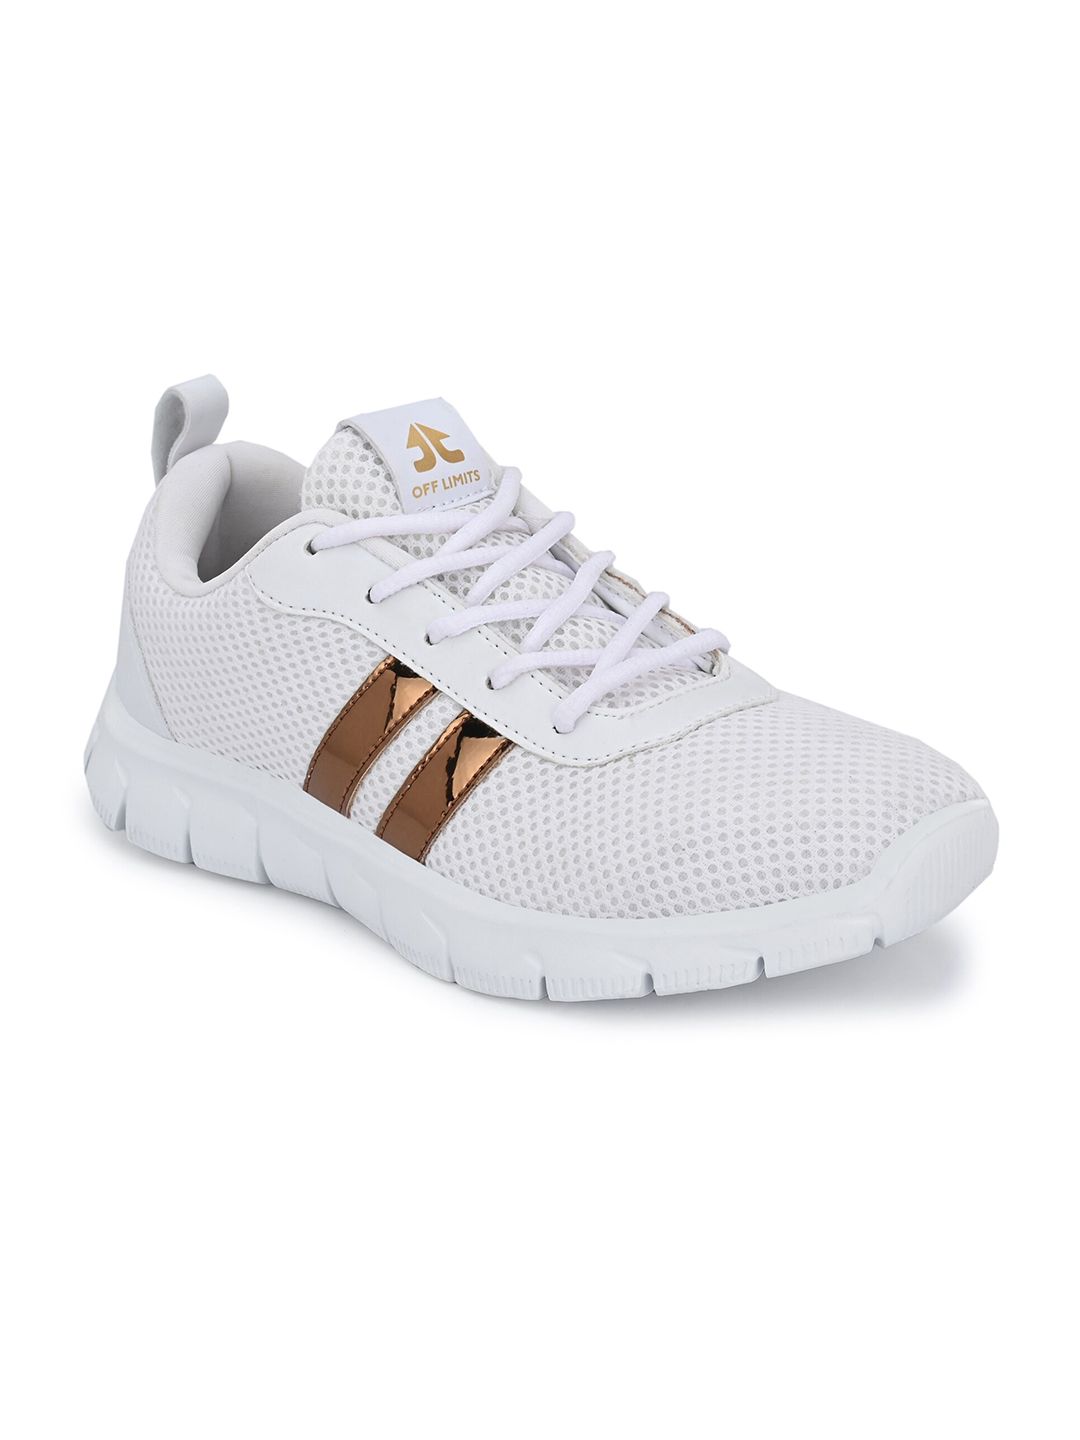 OFF LIMITS Women White Mesh Running Non-Marking Shoes Price in India